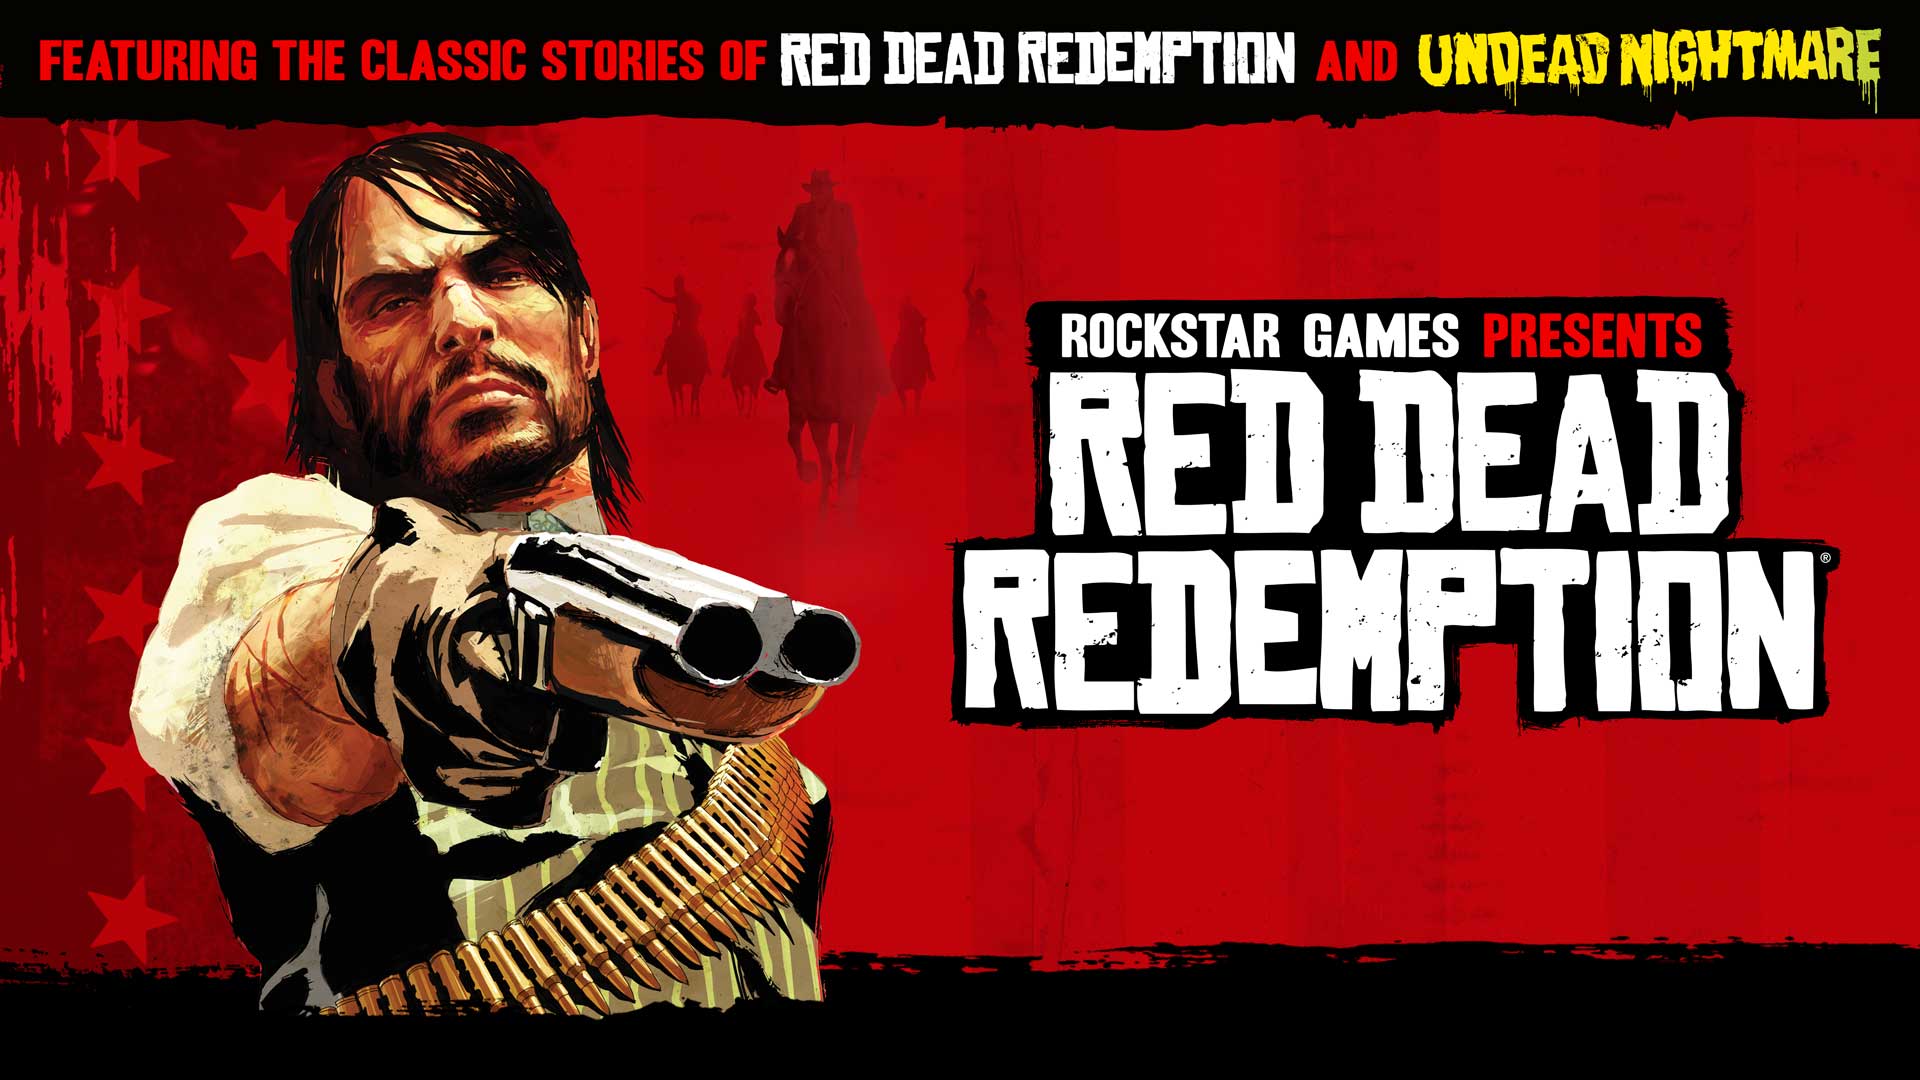 Already had It on 360 but PS3 has free online : r/rockstar